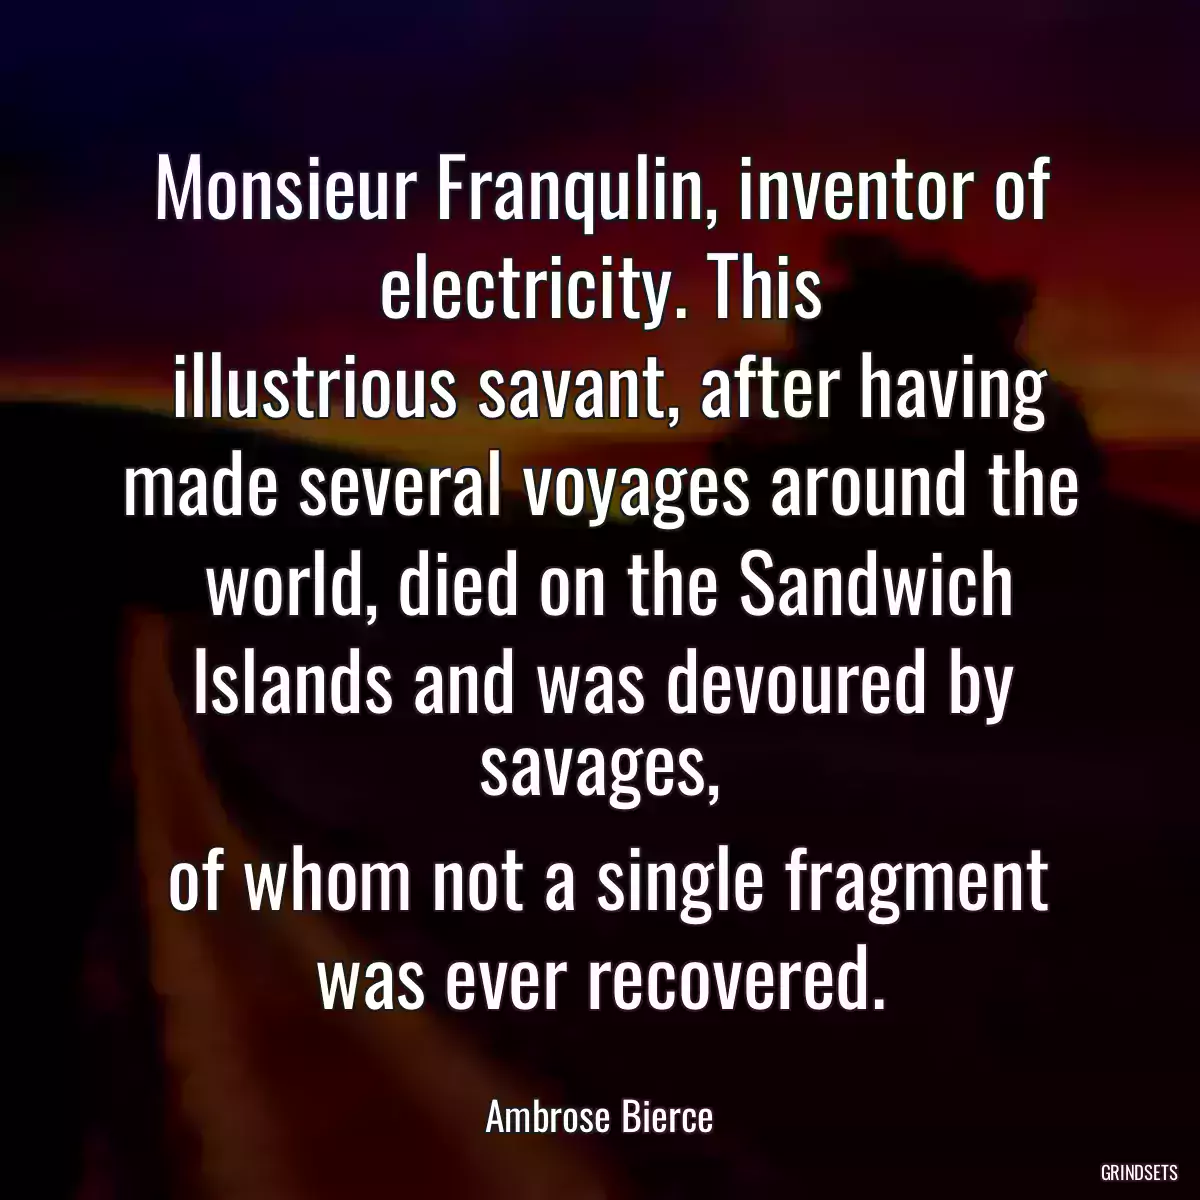 Monsieur Franqulin, inventor of electricity. This
 illustrious savant, after having made several voyages around the
 world, died on the Sandwich Islands and was devoured by savages,
 of whom not a single fragment was ever recovered.